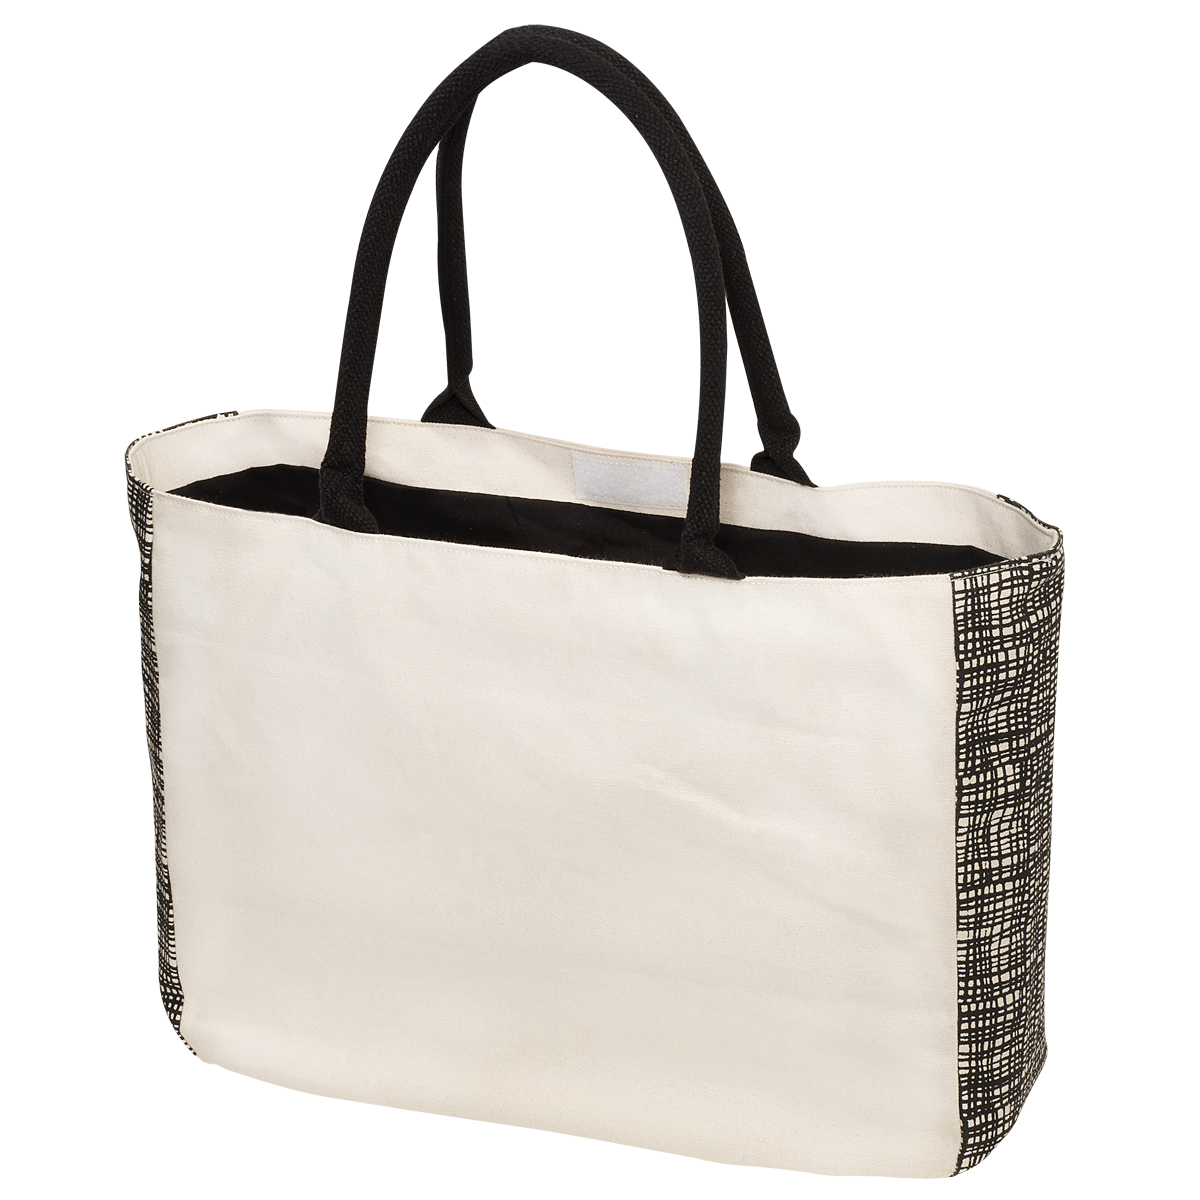 Canvas Tote with Gusset Accents